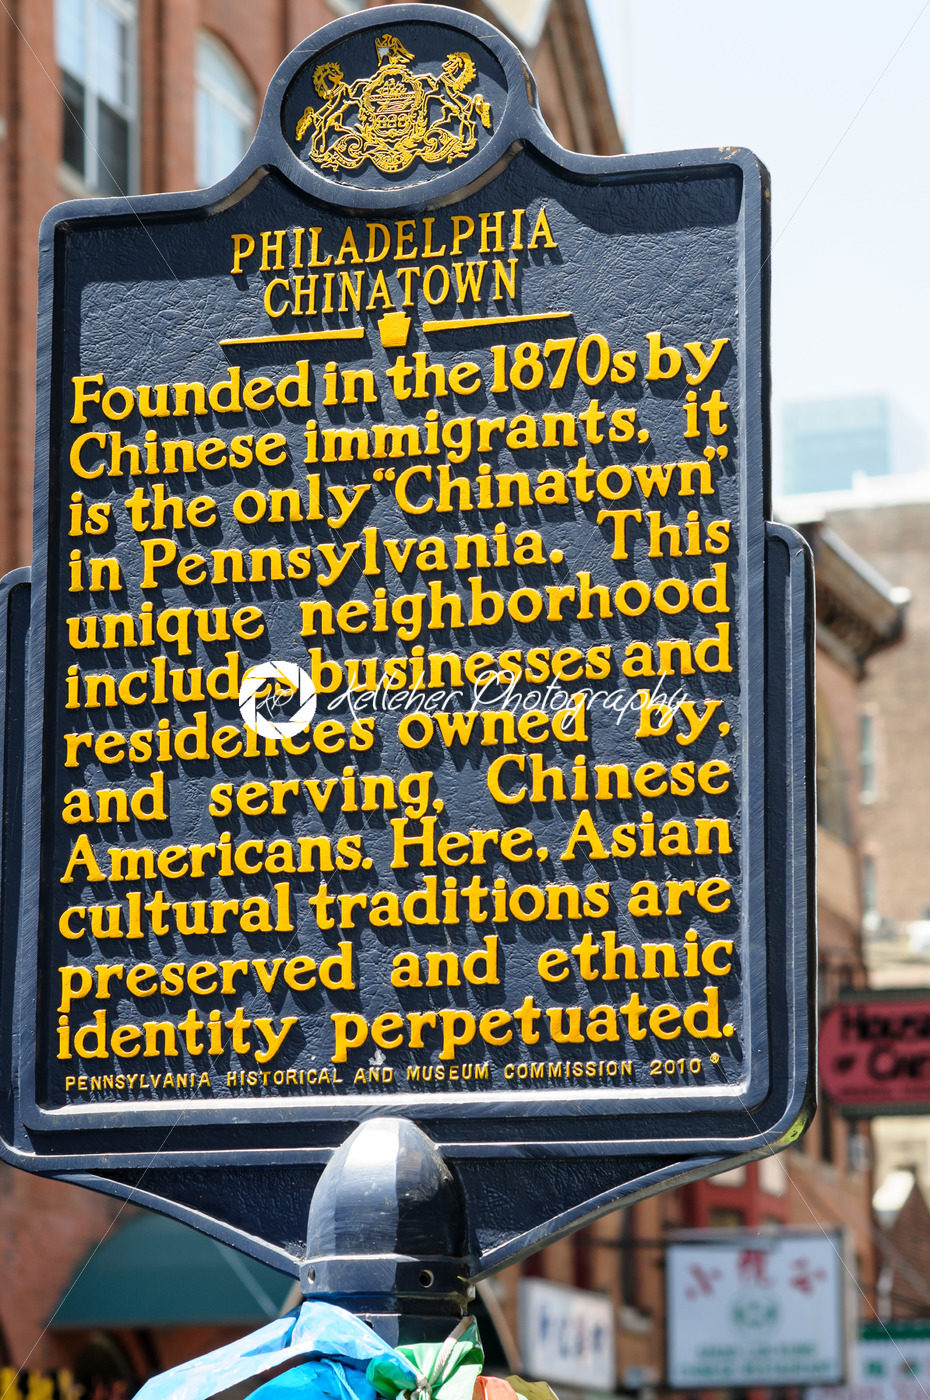 PHILADELPHIA, PA – MAY 14: Sign indicating the Chinatown section of downtown Philadelphia on May 14, 2015 - Kelleher Photography Store